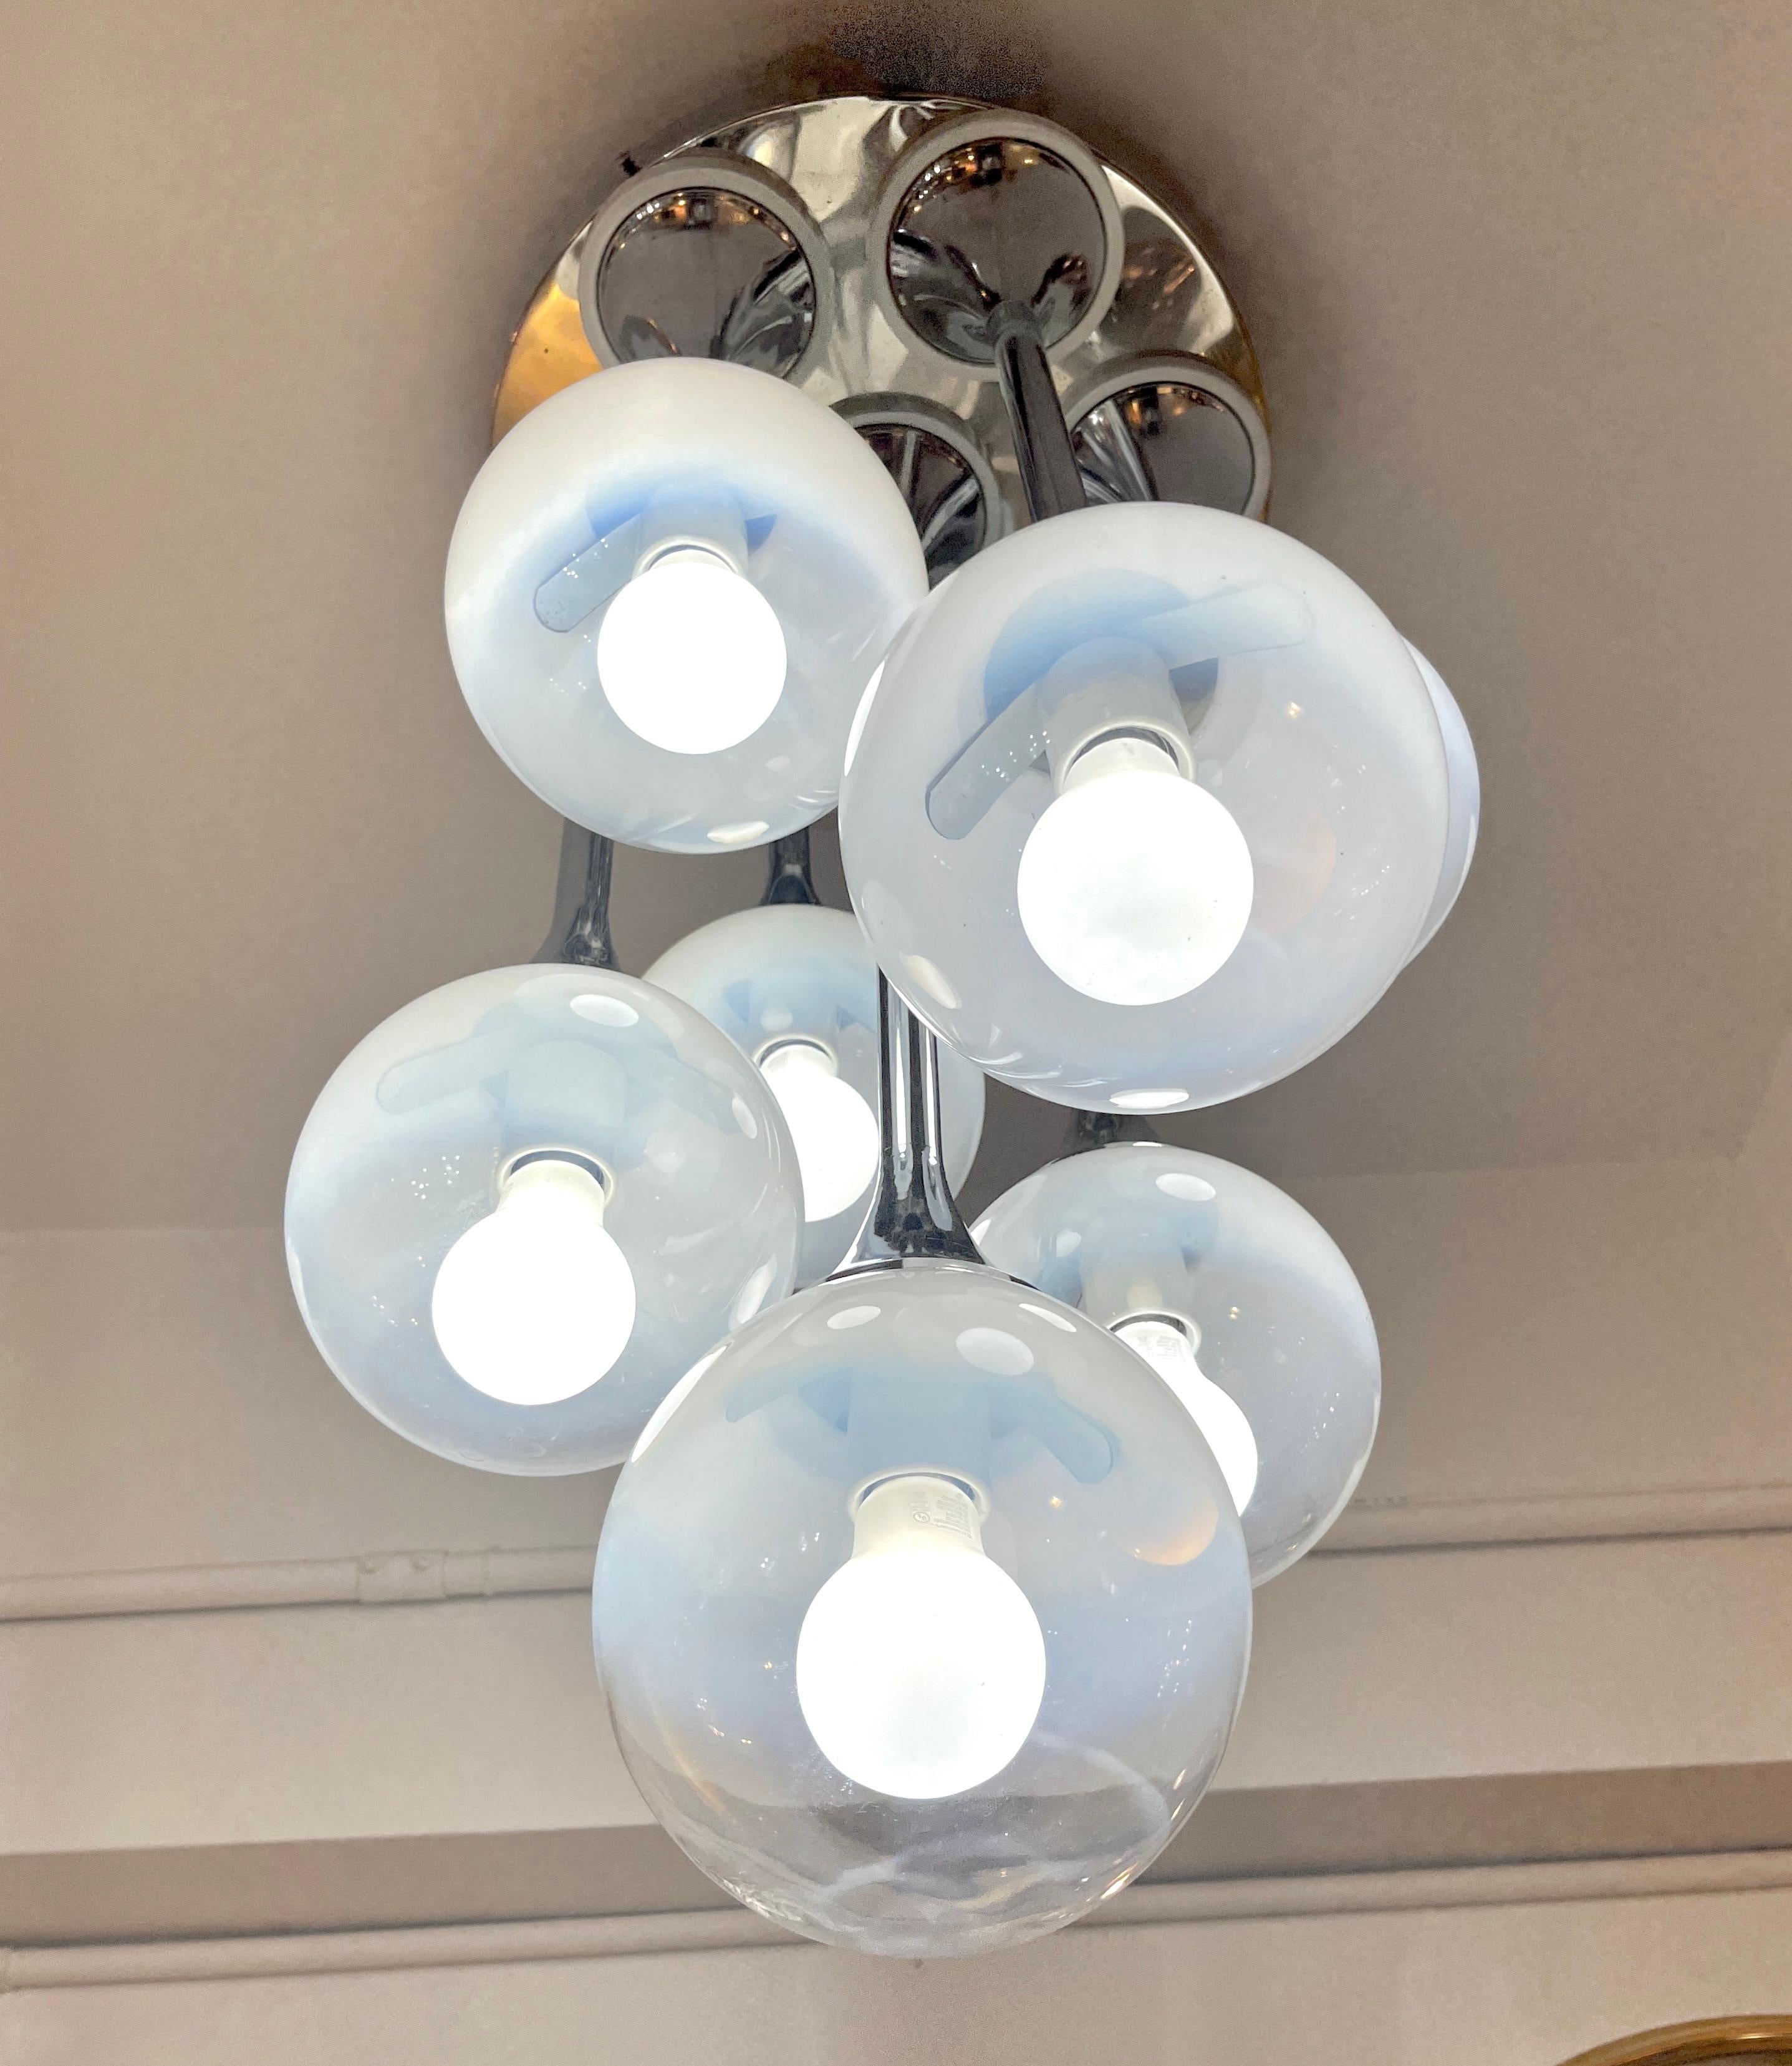 Mid-century modern Italian light fixture by Goffredo Reggiani, a versatile creation that is a flush mount pendant chandelier but can also be used as a table lamp. This piece is highly collectible and interesting because it bears the 7 original round